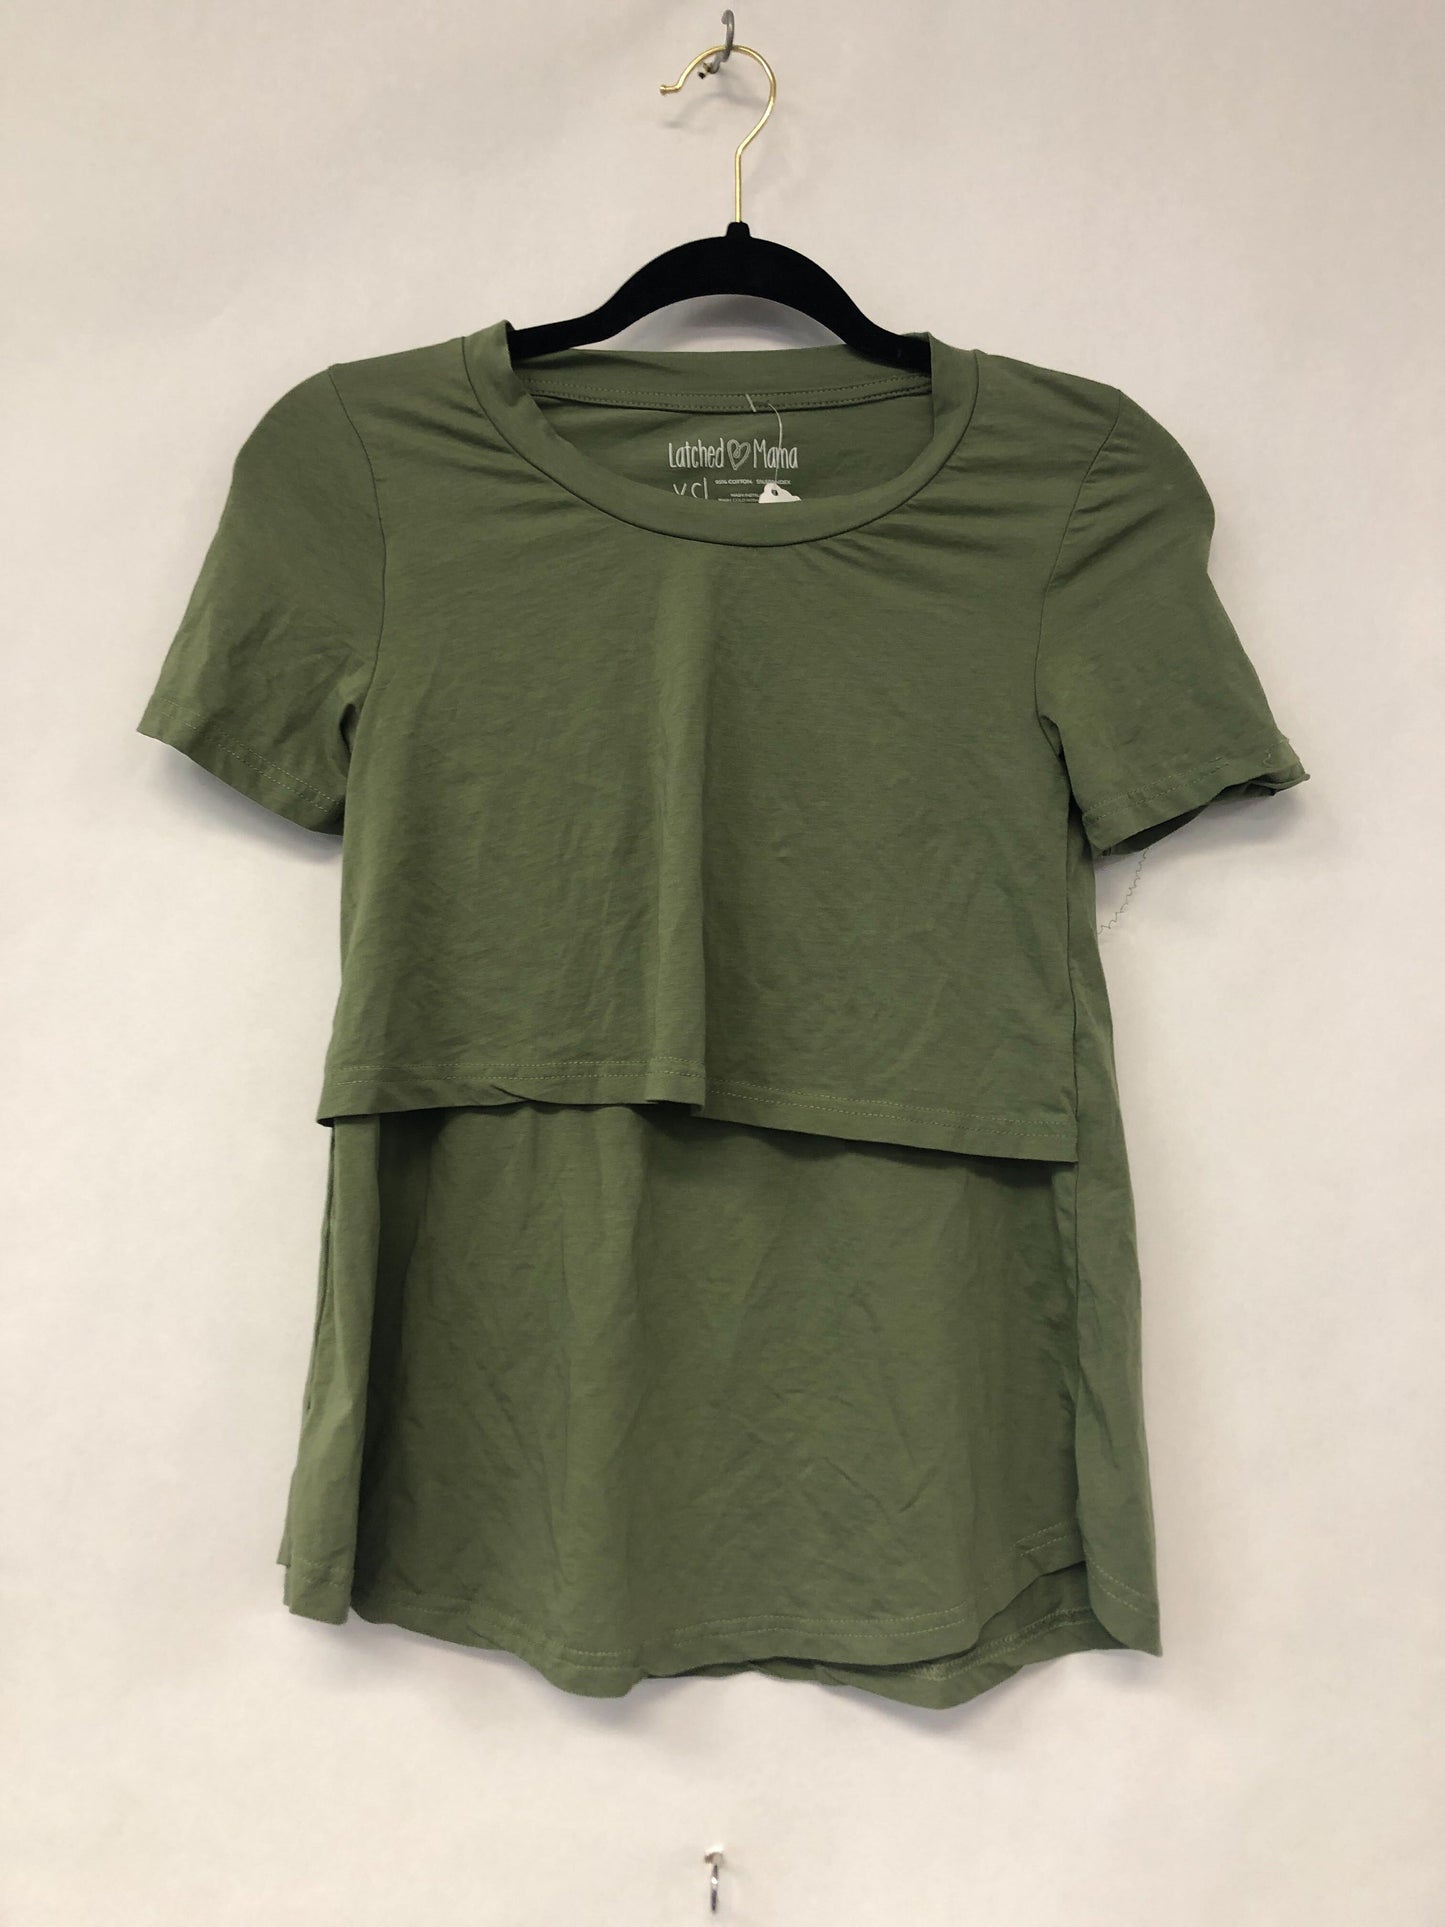 Outlet 6269 - Latched Mama Cotton Swing Nursing Tee - Olive - Extra Small